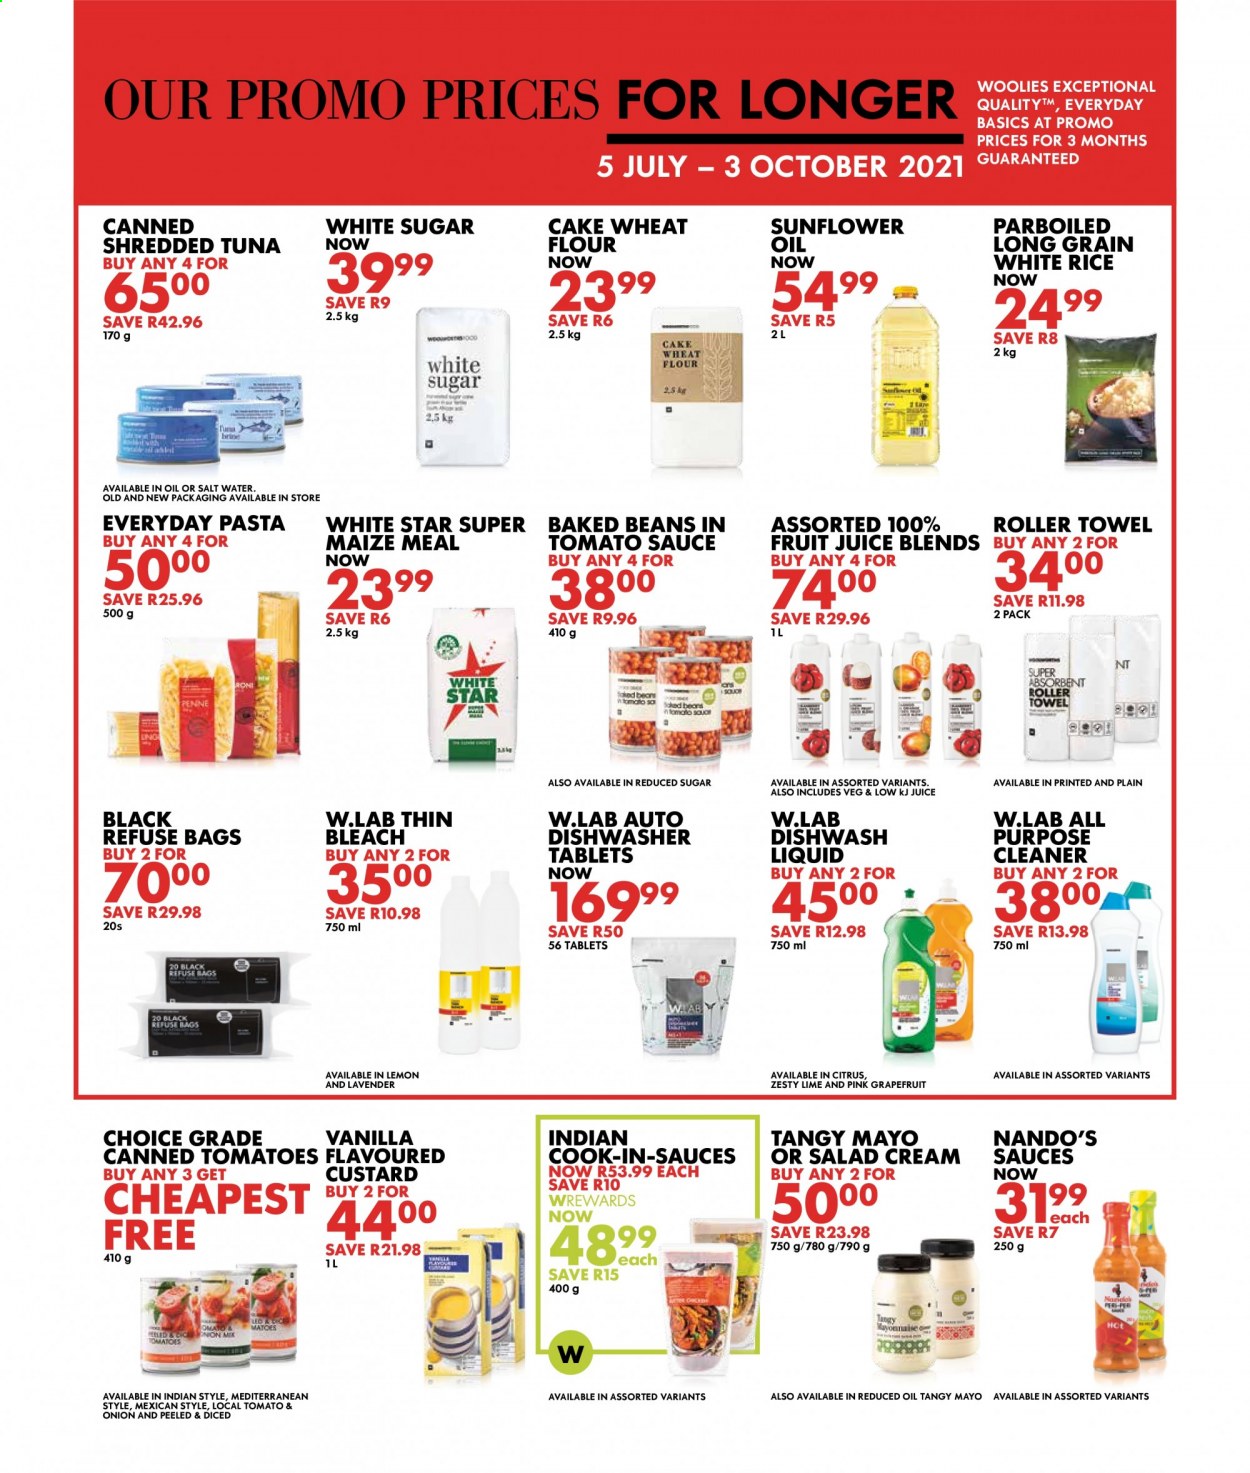 Woolworths specials - 07.05.2021 - 07.25.2021. 